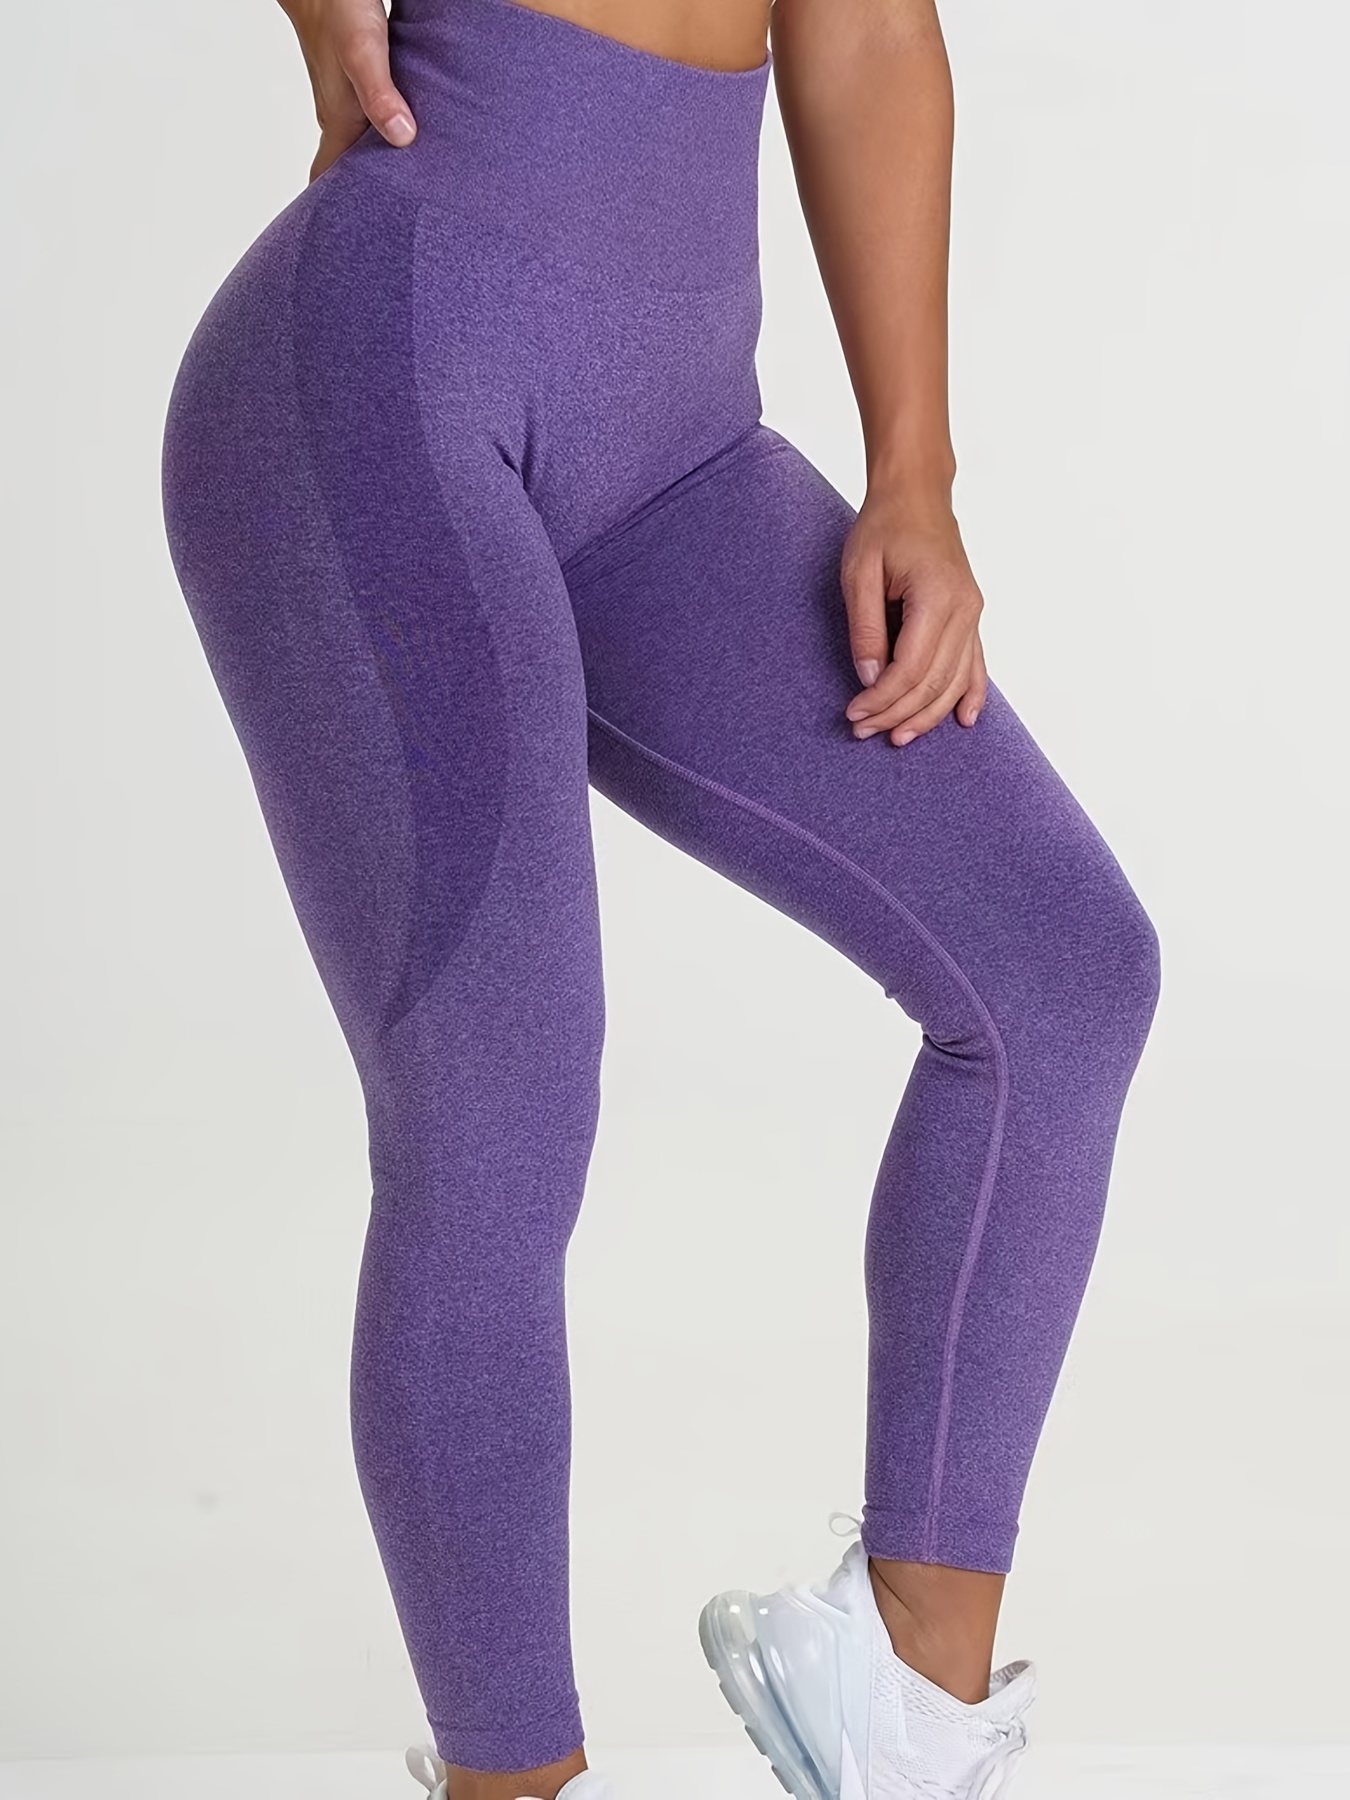 JWZUY Women's Color-blocking High-waisted Hip Lifting Exercise Fitness  Tight Yoga Pants Purple XXL